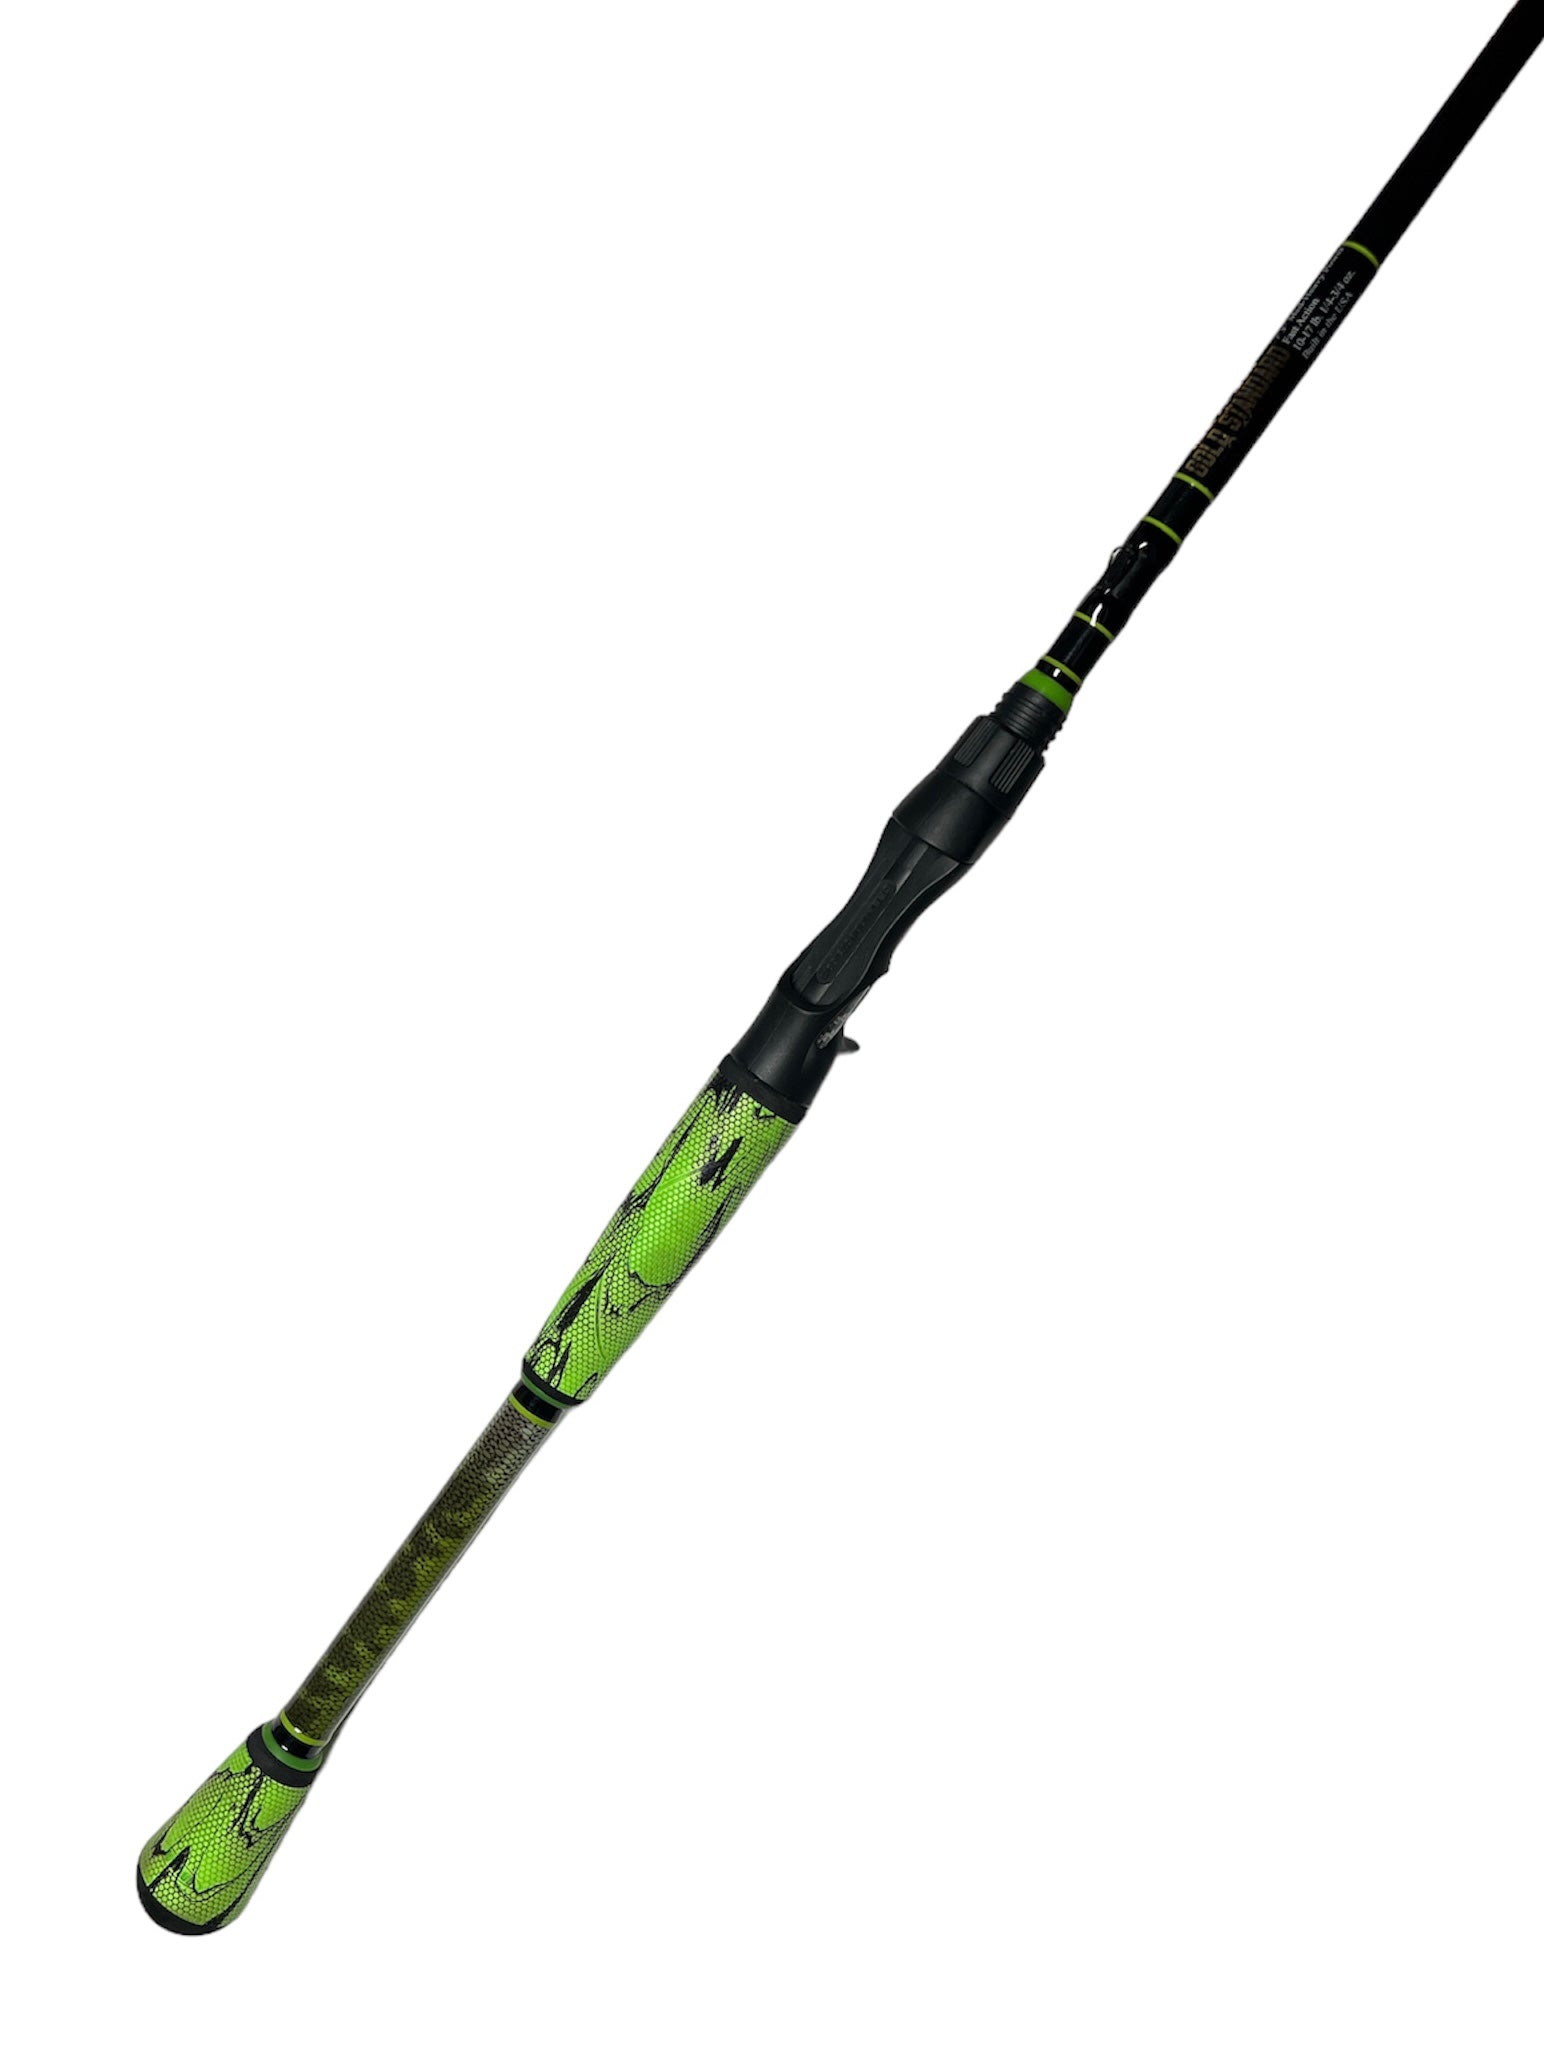 7'3 Med-Heavy Power Fast Action Bass Bully Pre-Built Casting Rod - Lime  Green